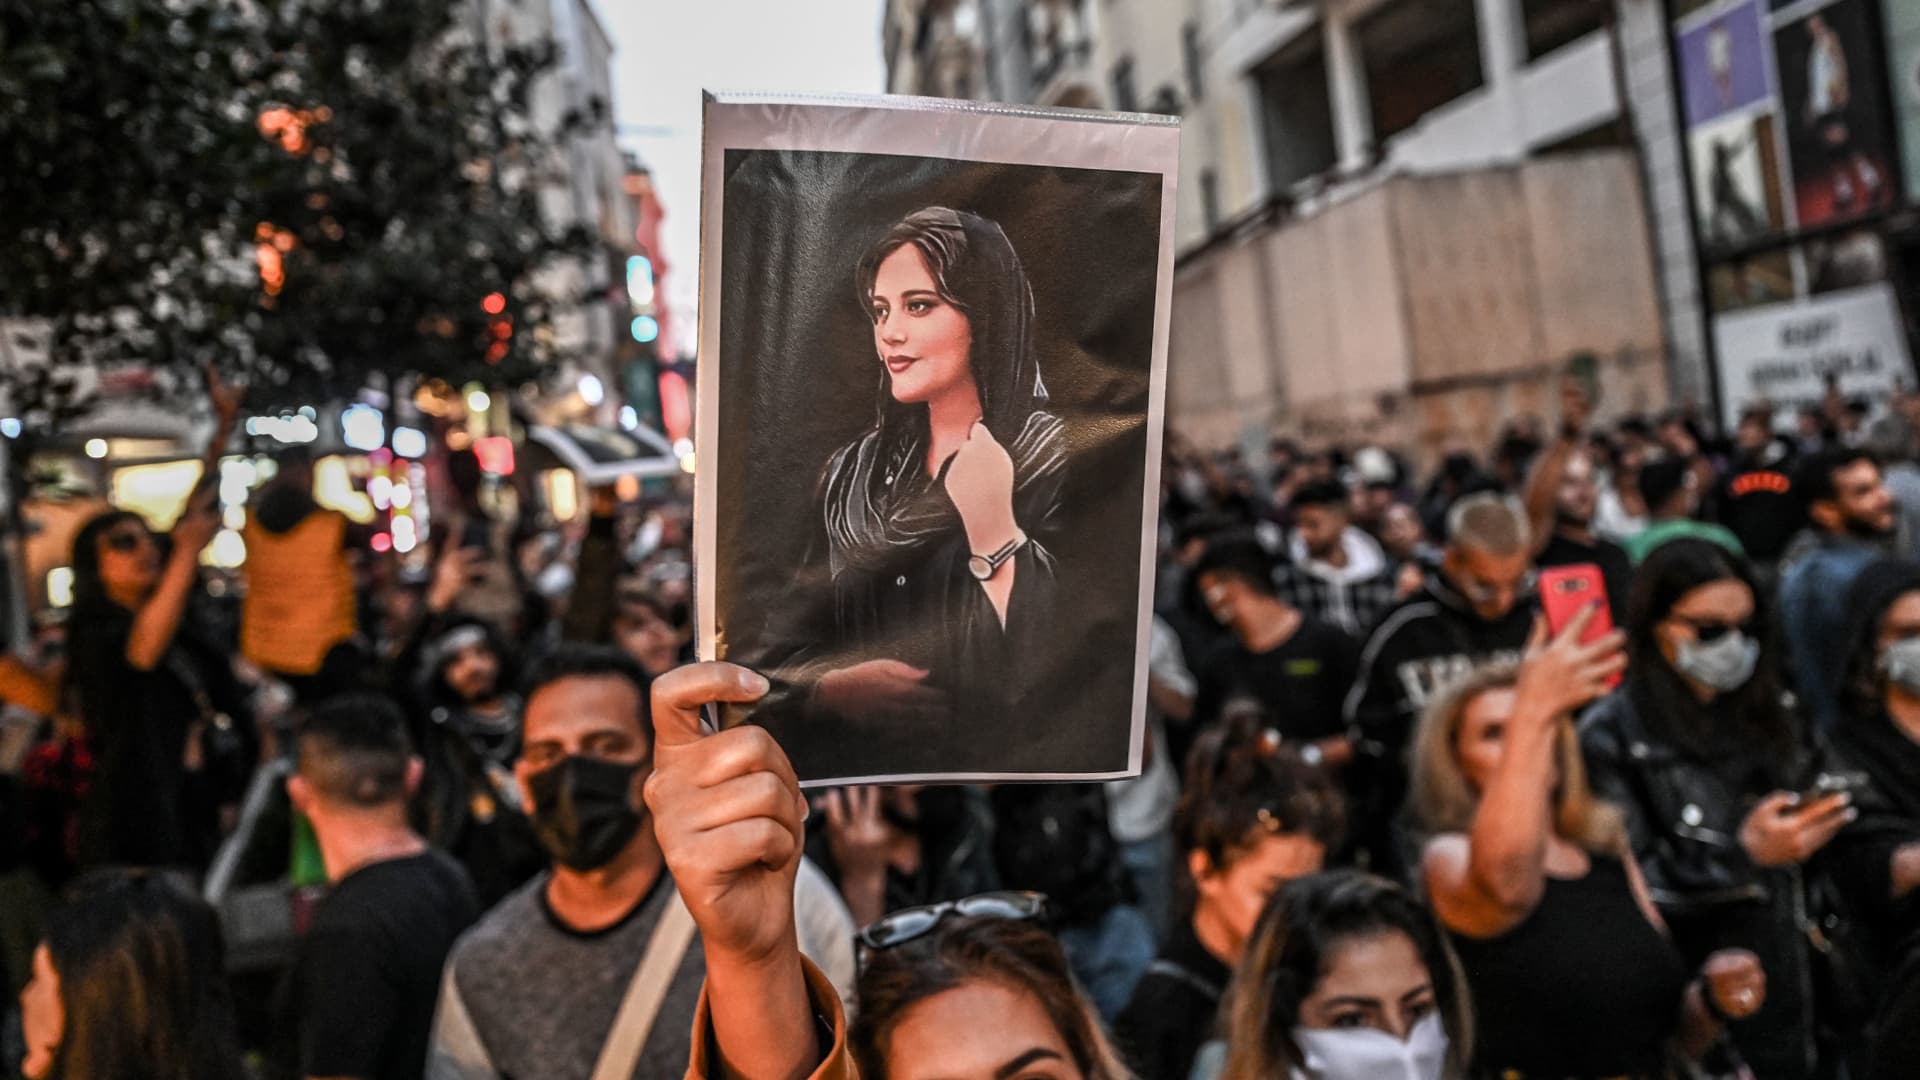 A protester holds a portrait of Mahsa Amini during a demonstration in support of Amini, a young Iranian woman who died after being arrested in Tehran by the Islamic Republic's morality police, on Istiklal avenue in Istanbul on Sept. 20, 2022.